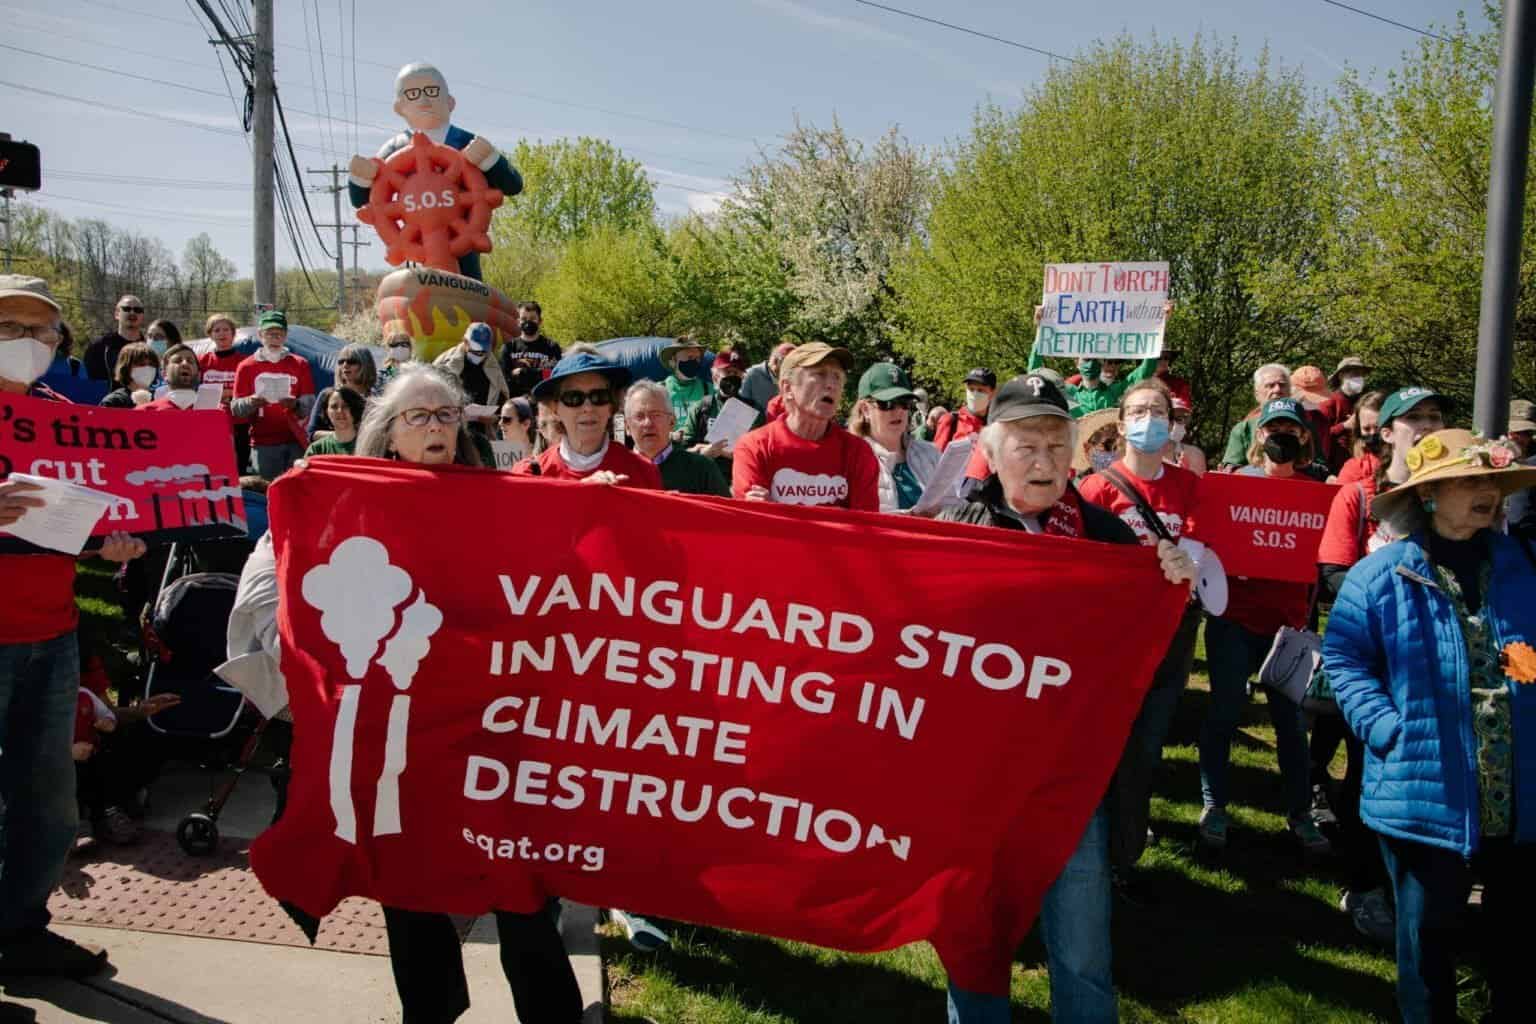 A large crowd of people standing outside, singing. Two people in the foreground are holding a red banner with white text that says "Vanguard stop investing in climate destruction."